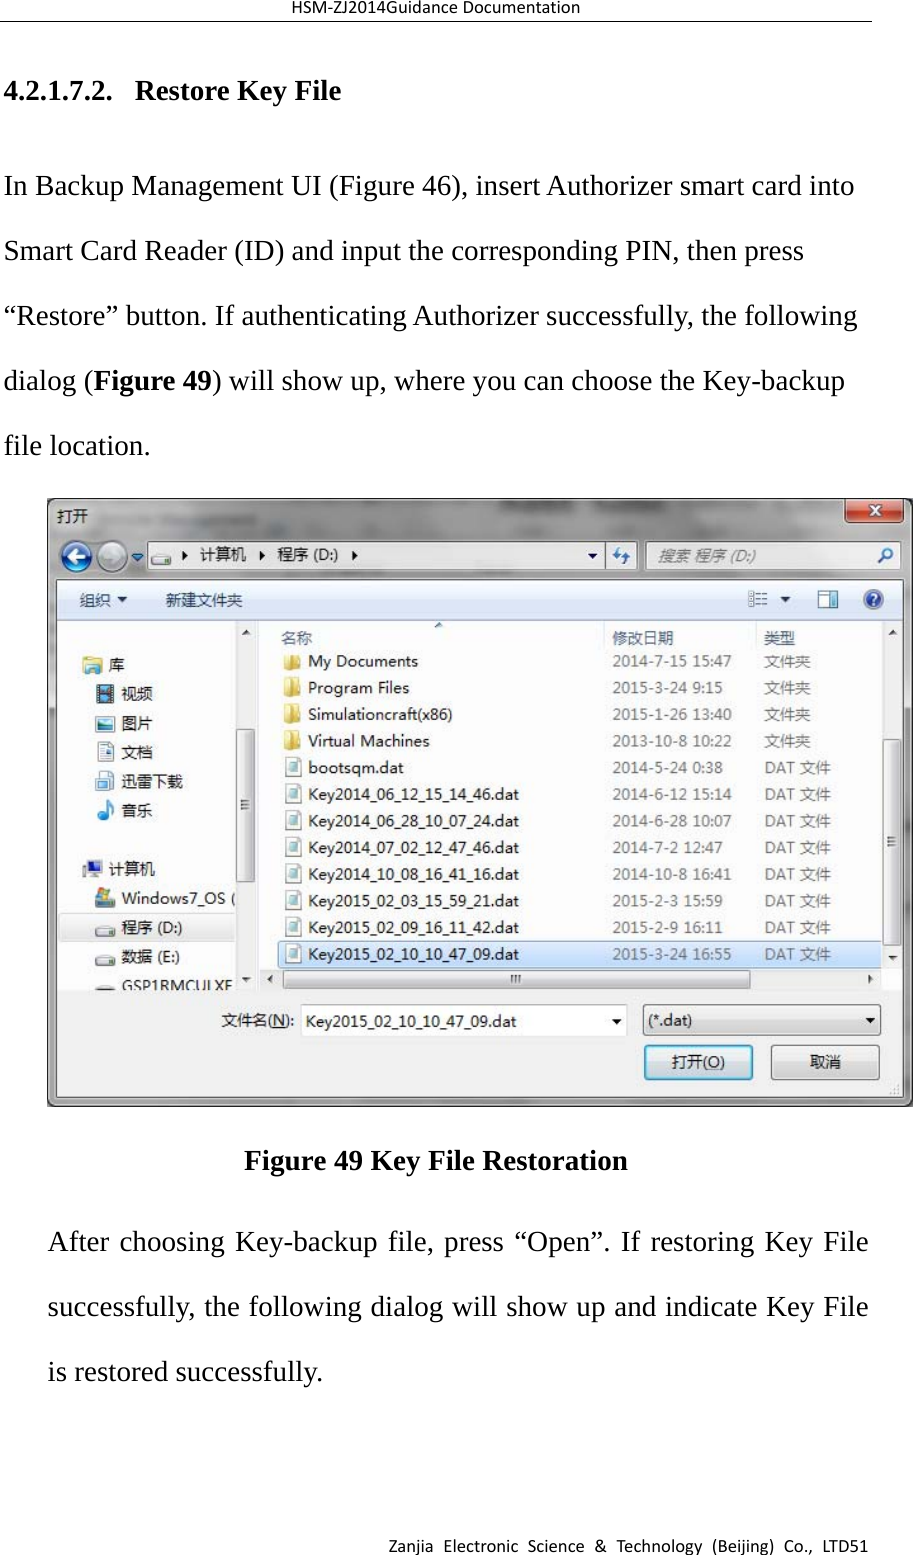 HSM‐ZJ2014GuidanceDocumentationZanjiaElectronicScience&amp;Technology(Beijing)Co.,LTD514.2.1.7.2. Restore Key File In Backup Management UI (Figure 46), insert Authorizer smart card into Smart Card Reader (ID) and input the corresponding PIN, then press “Restore” button. If authenticating Authorizer successfully, the following dialog (Figure 49) will show up, where you can choose the Key-backup file location.  Figure 49 Key File Restoration After choosing Key-backup file, press “Open”. If restoring Key File successfully, the following dialog will show up and indicate Key File is restored successfully.   